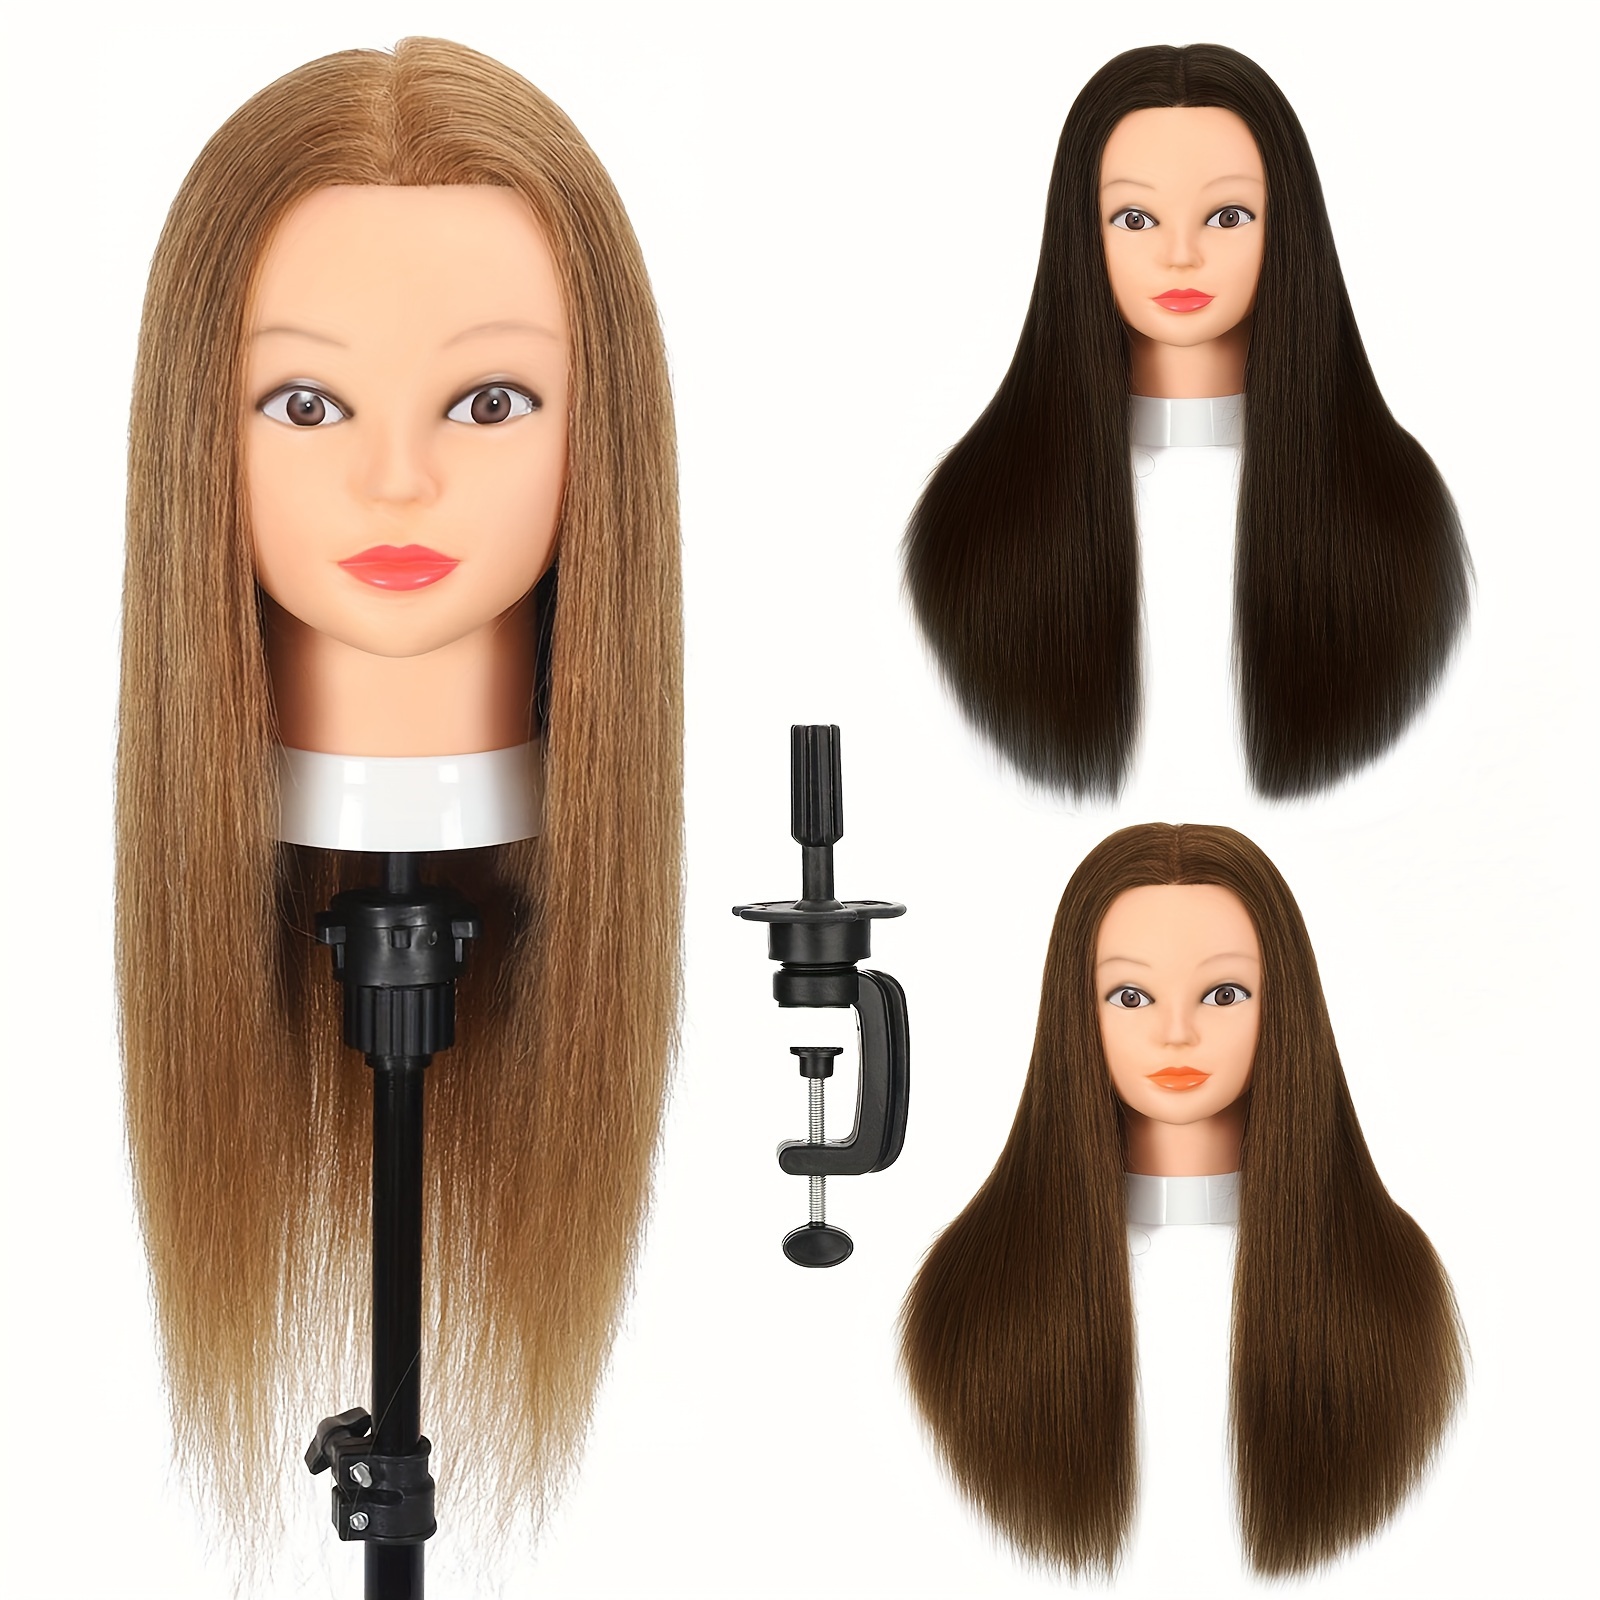 

100% Real Hair Mannequin Head With Human Hair Cosmetology Manikin Doll Head For Hairdresser Practice Styling Braiding Haircut Training Head With Free Clamp Holder